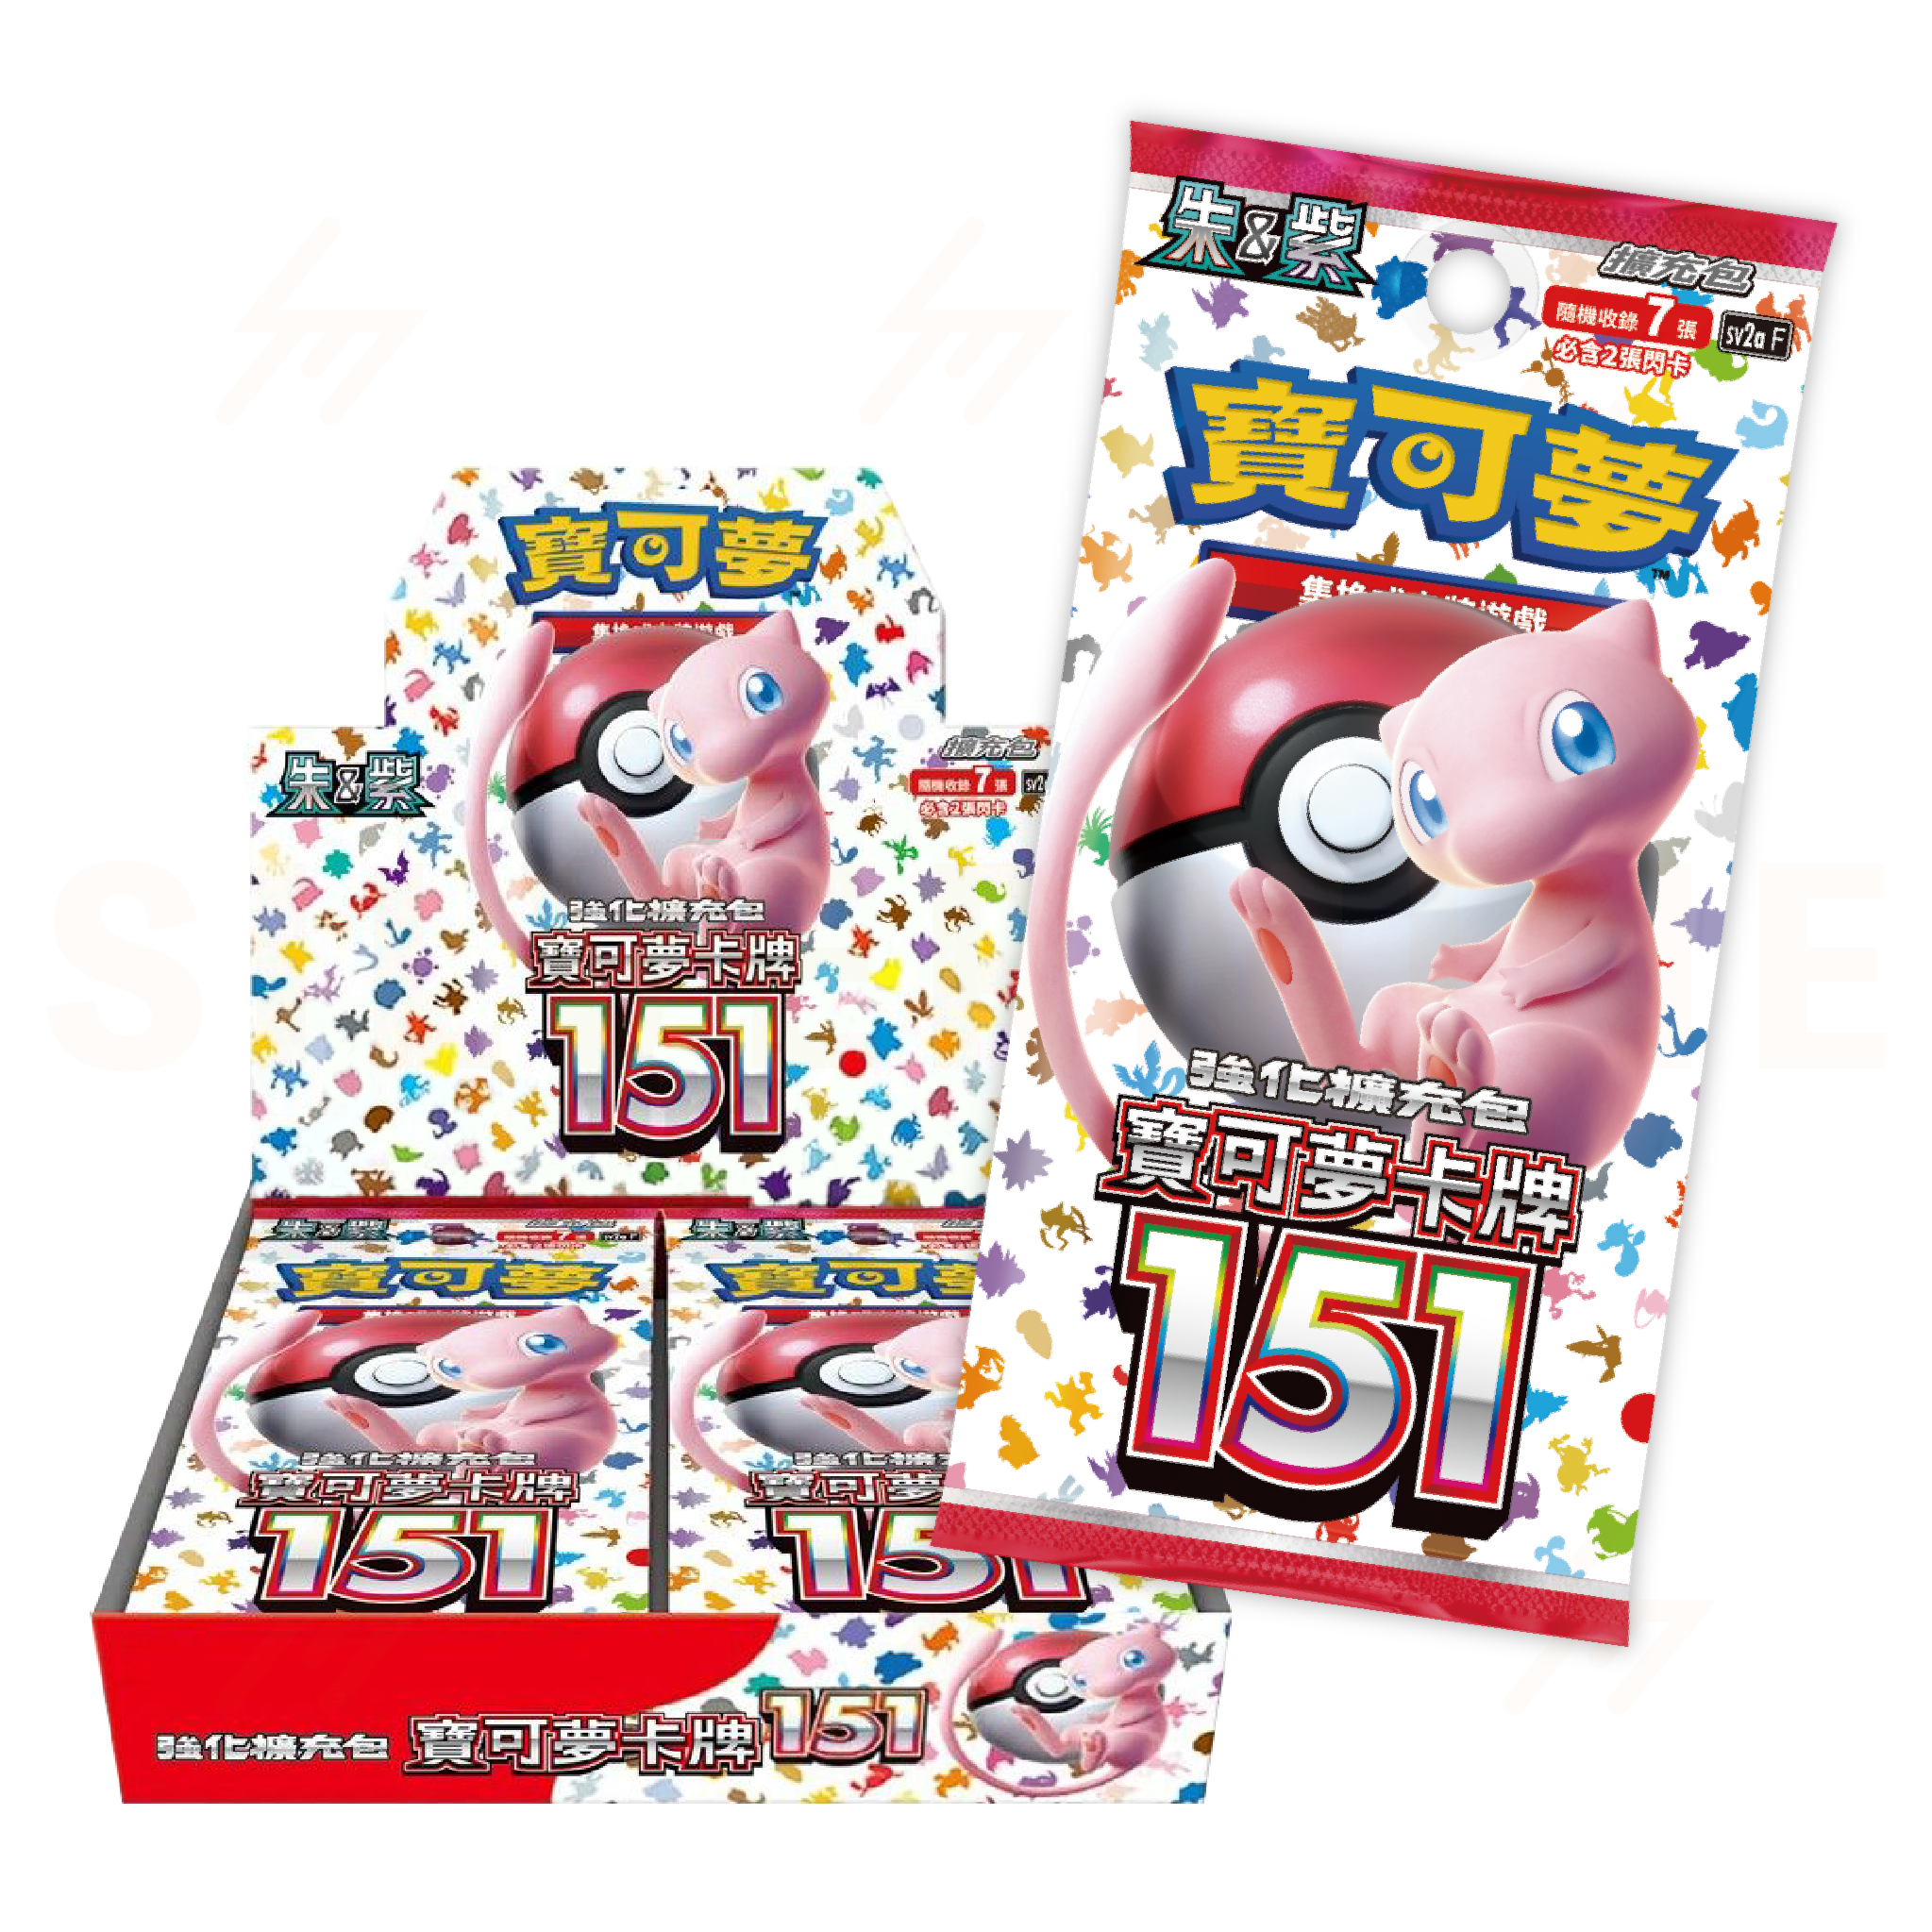 sv2A F - Pokemon TCG - Booster Box - Scarlet & Violet - Pokemon Card 151 (Traditional Chinese)